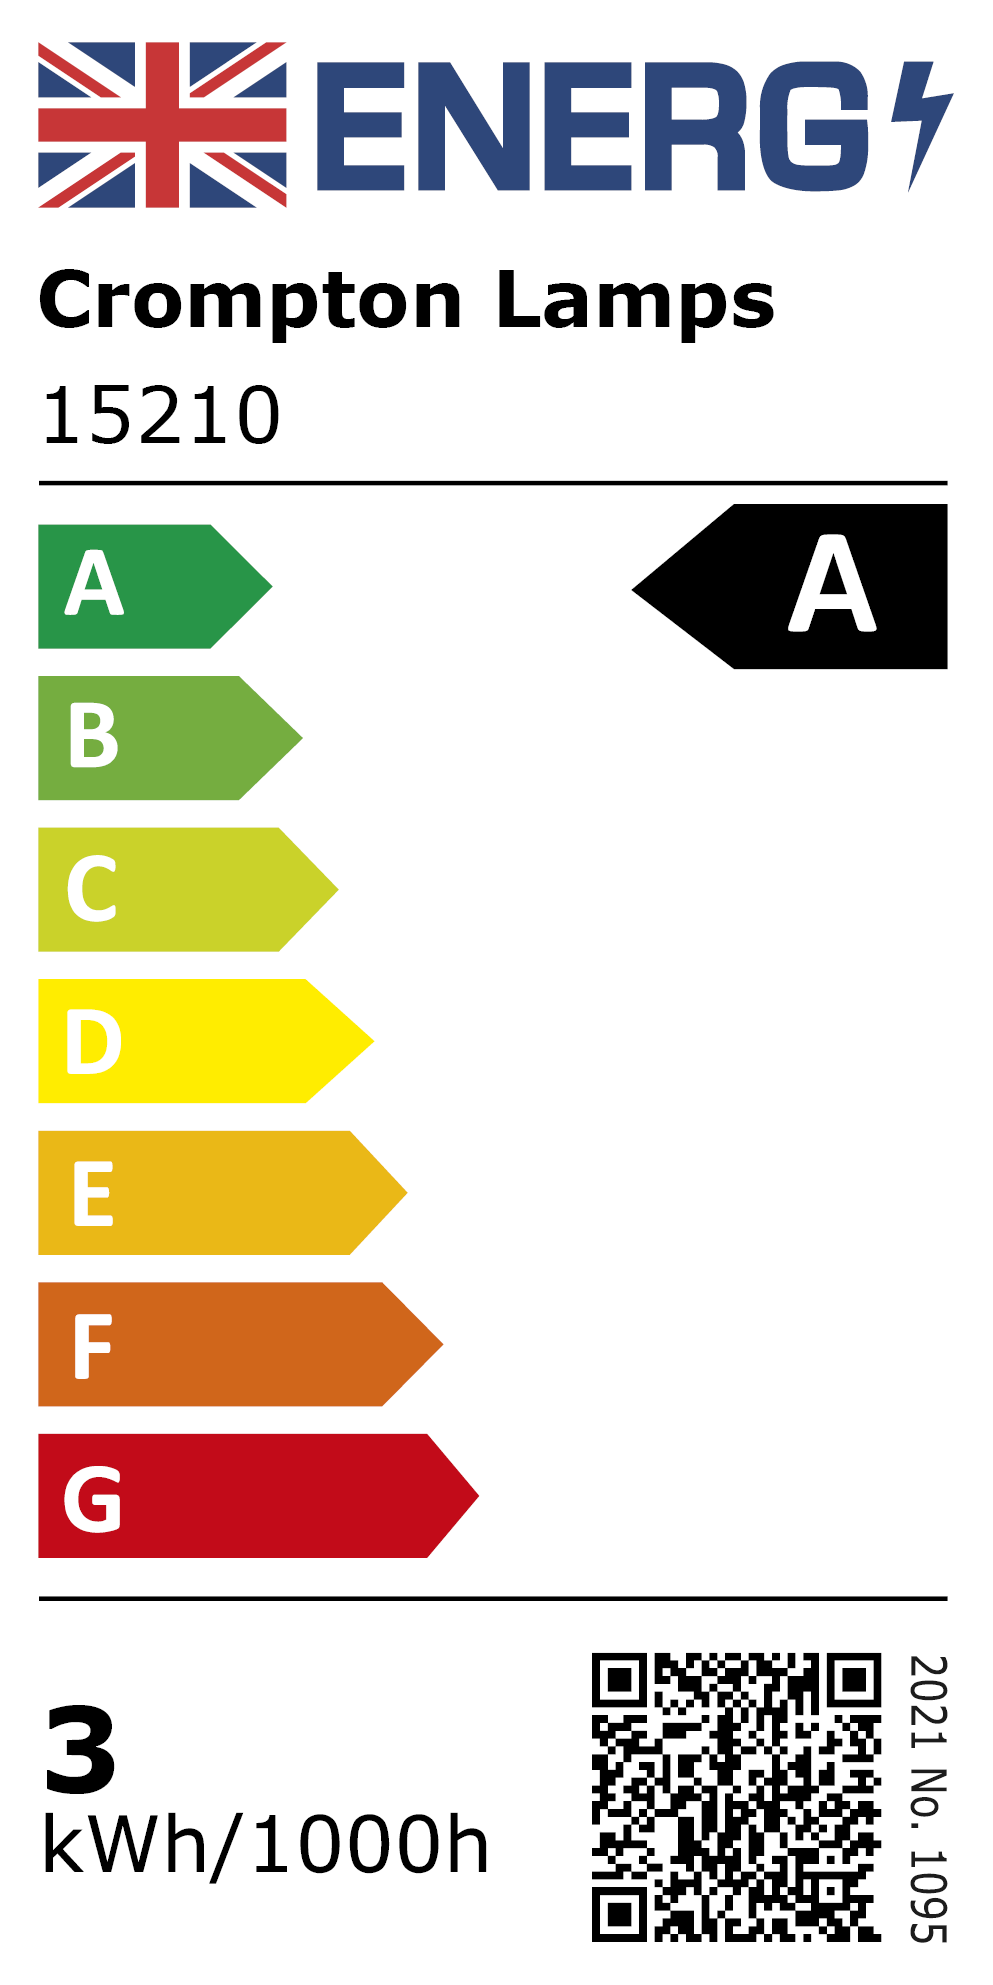 New 2021 Energy Rating Label: Stock Code 15210